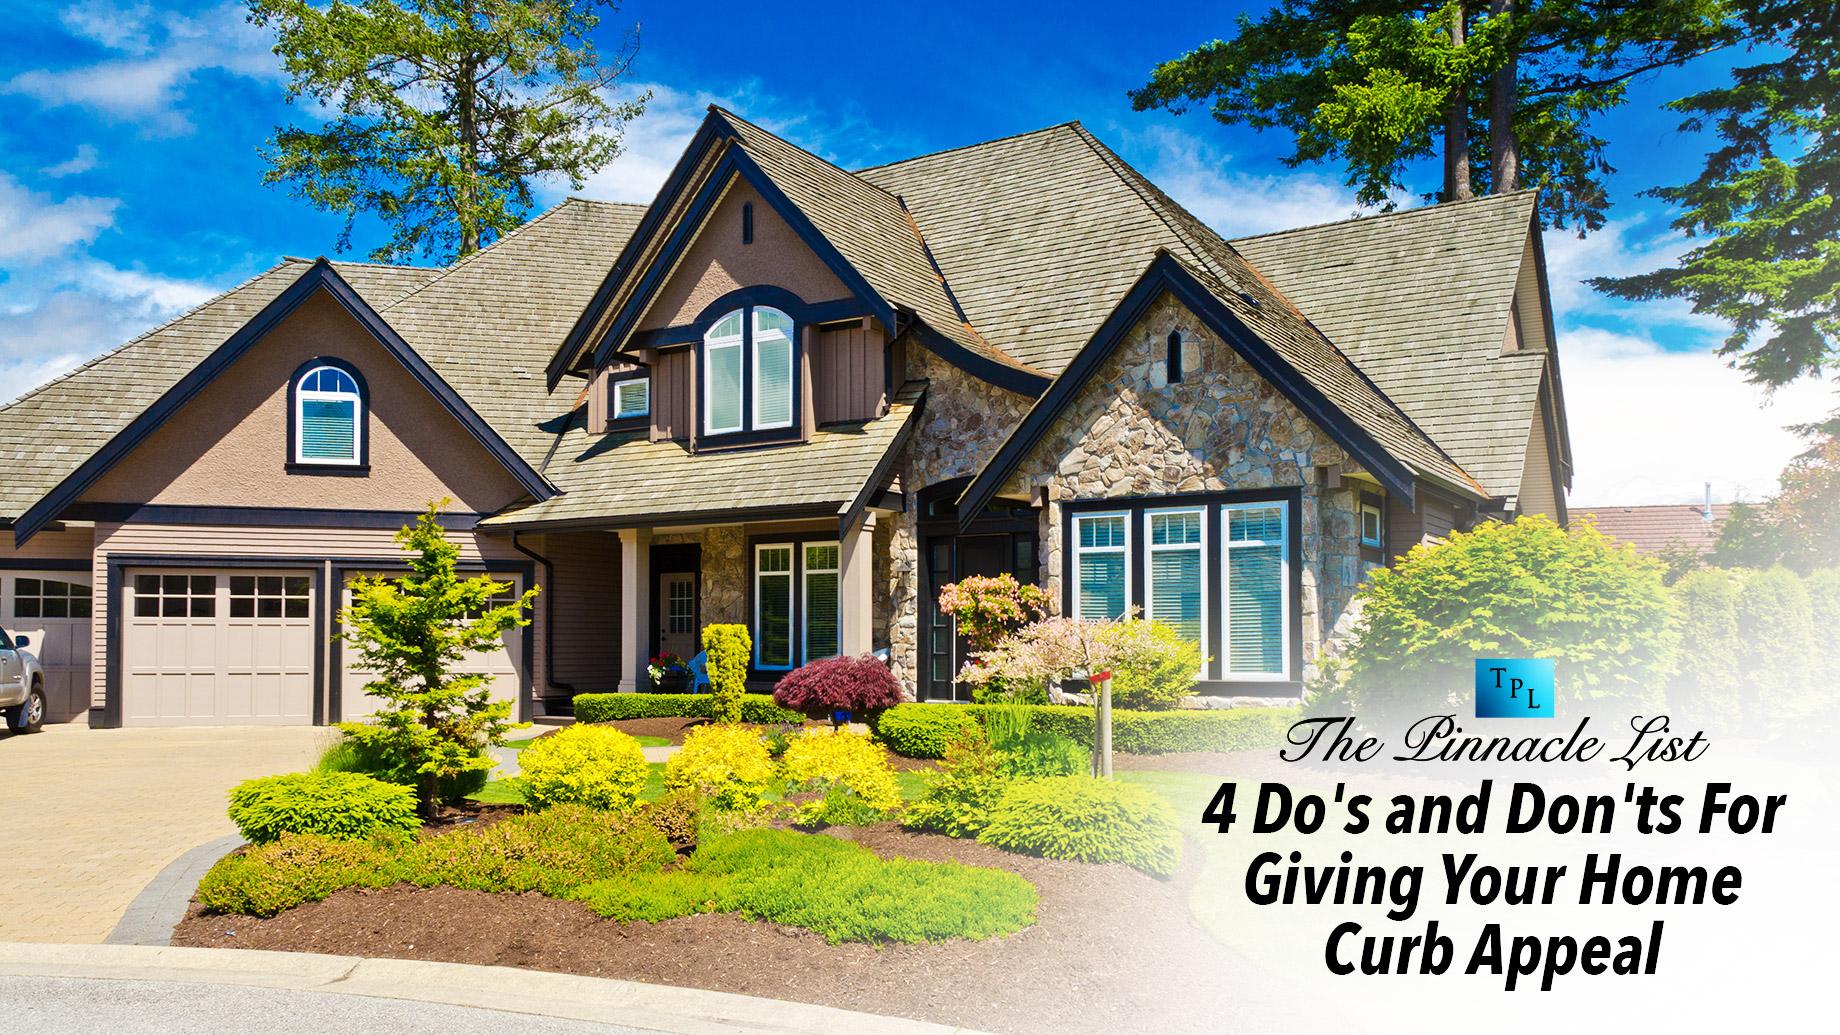 4 Do’s and Don’ts For Giving Your Home Curb Appeal